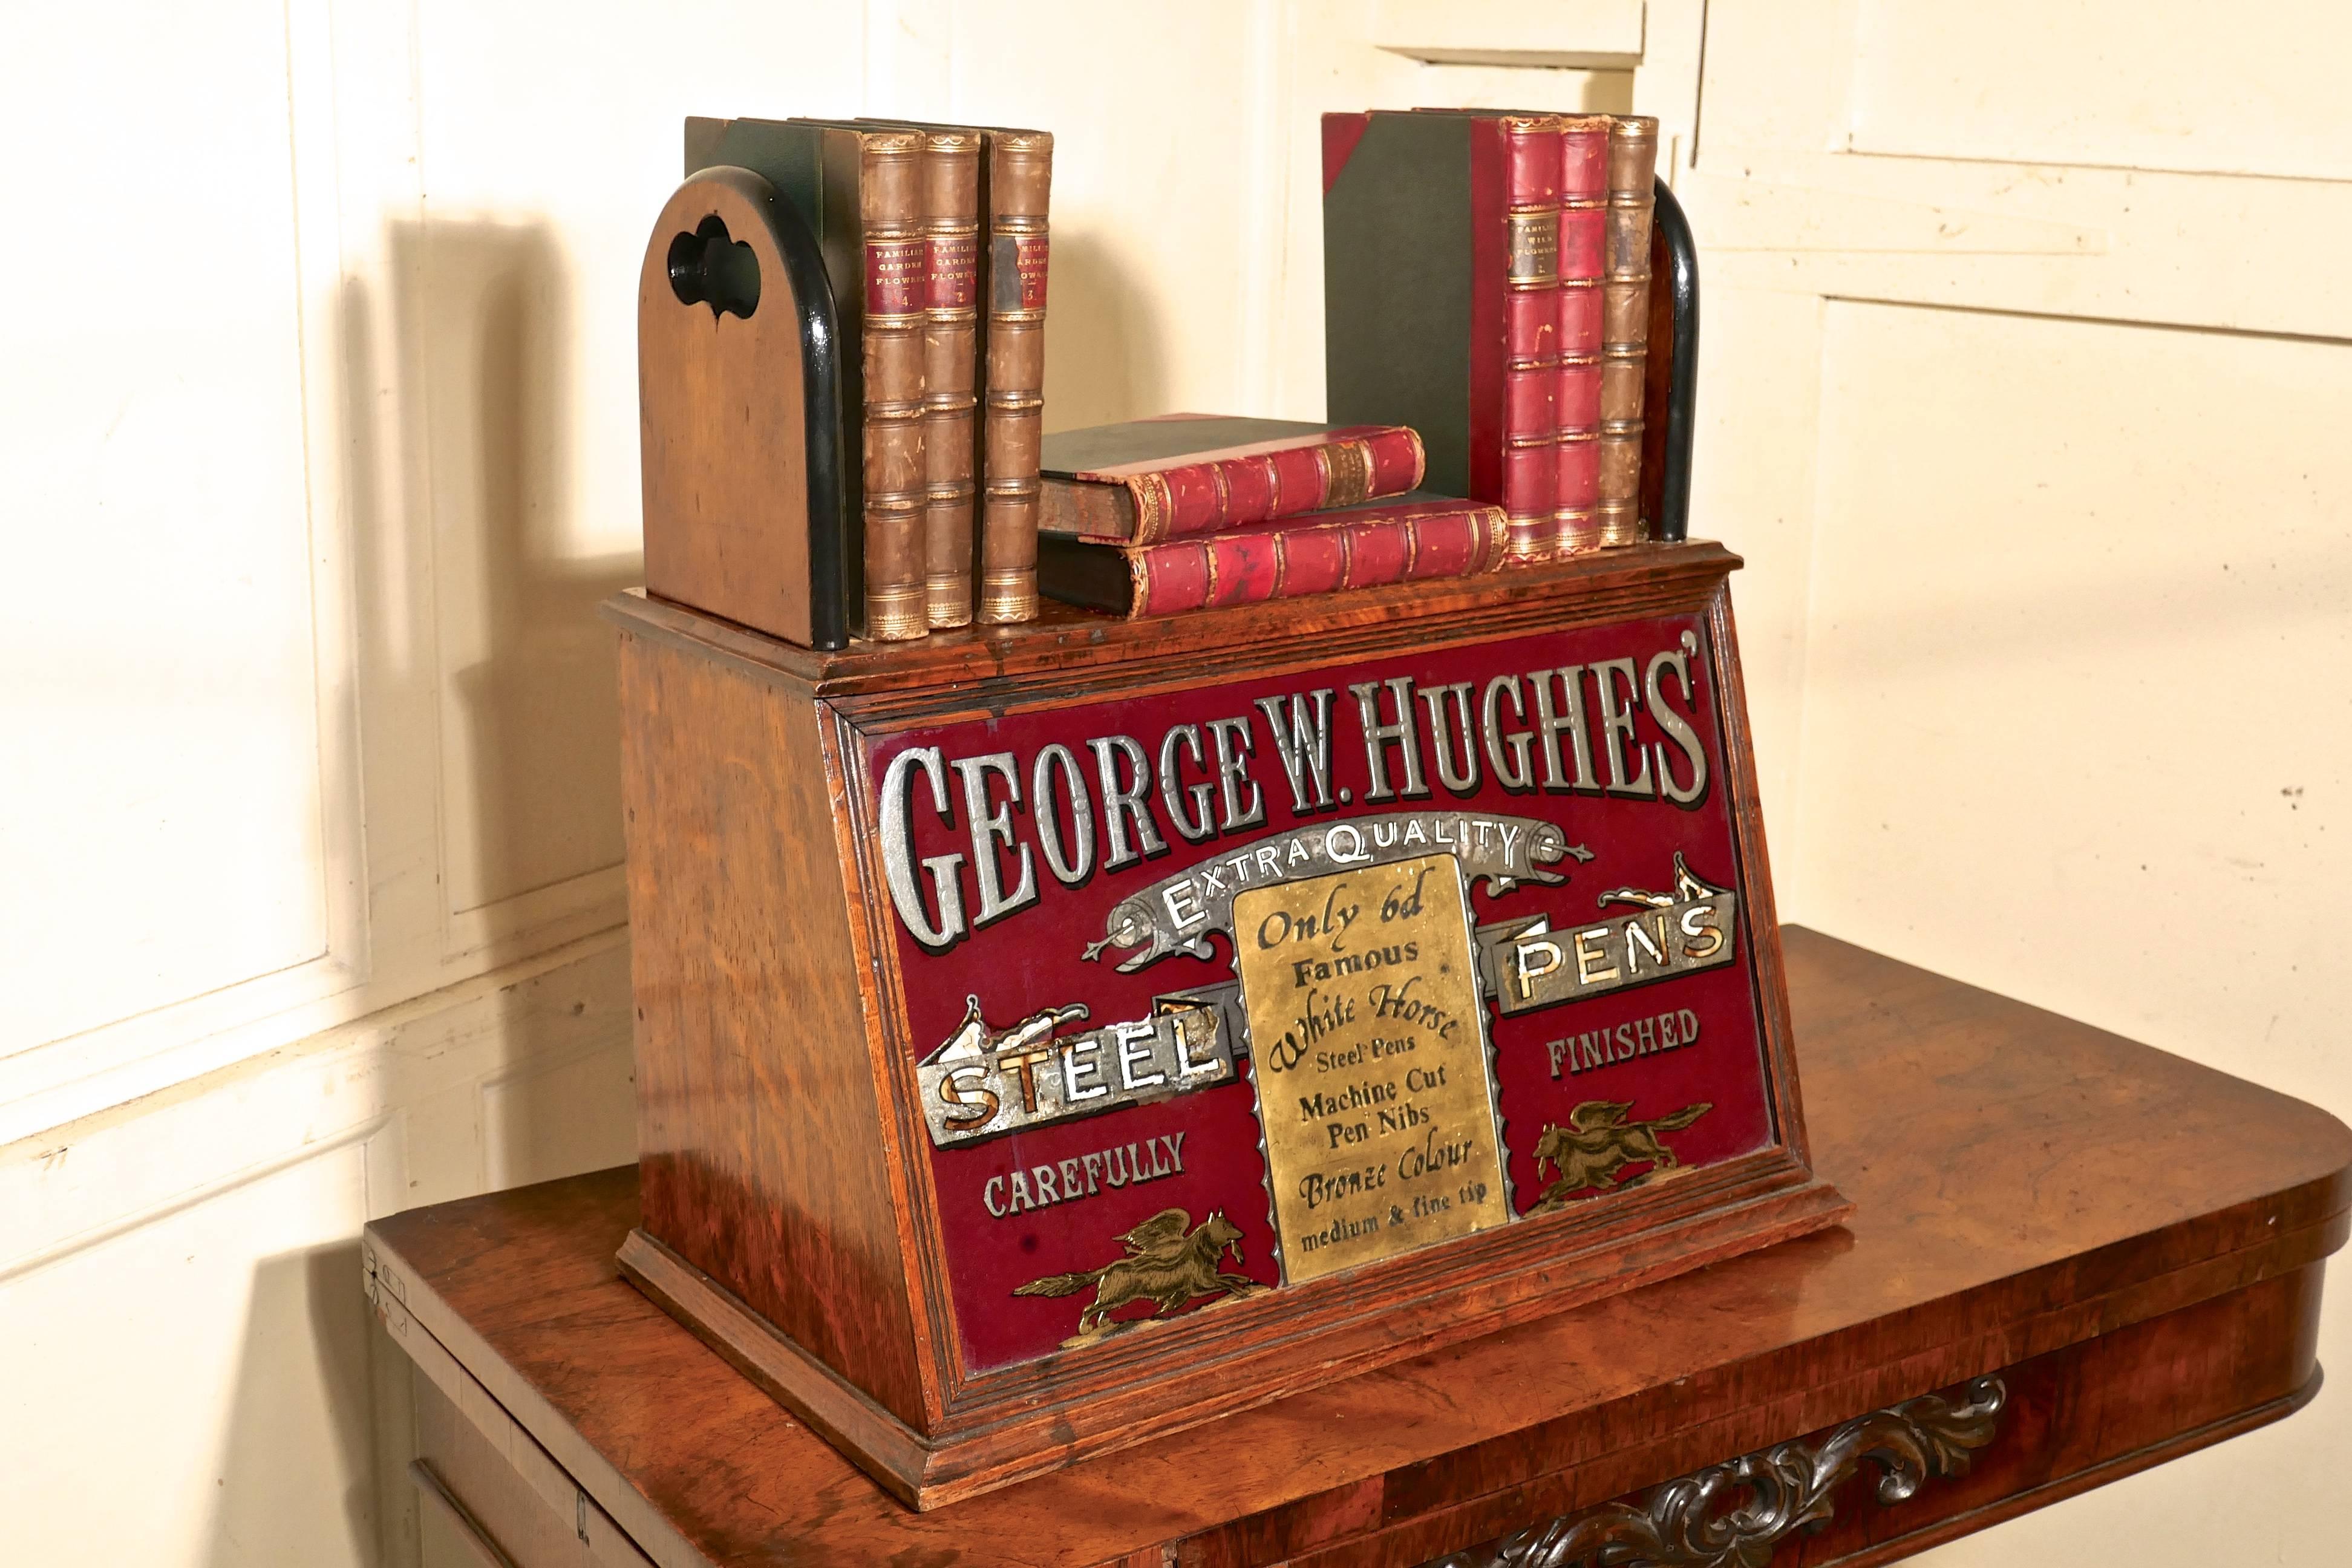 Victorian advertising stationers cupboard, shop display pen cabinet.

A lovely piece of Victorian shop display, a bespoke oak cupboard is from George W Hughes pen maker, advertising steel pens.
The cabinet has on the front a sign written, gilded and